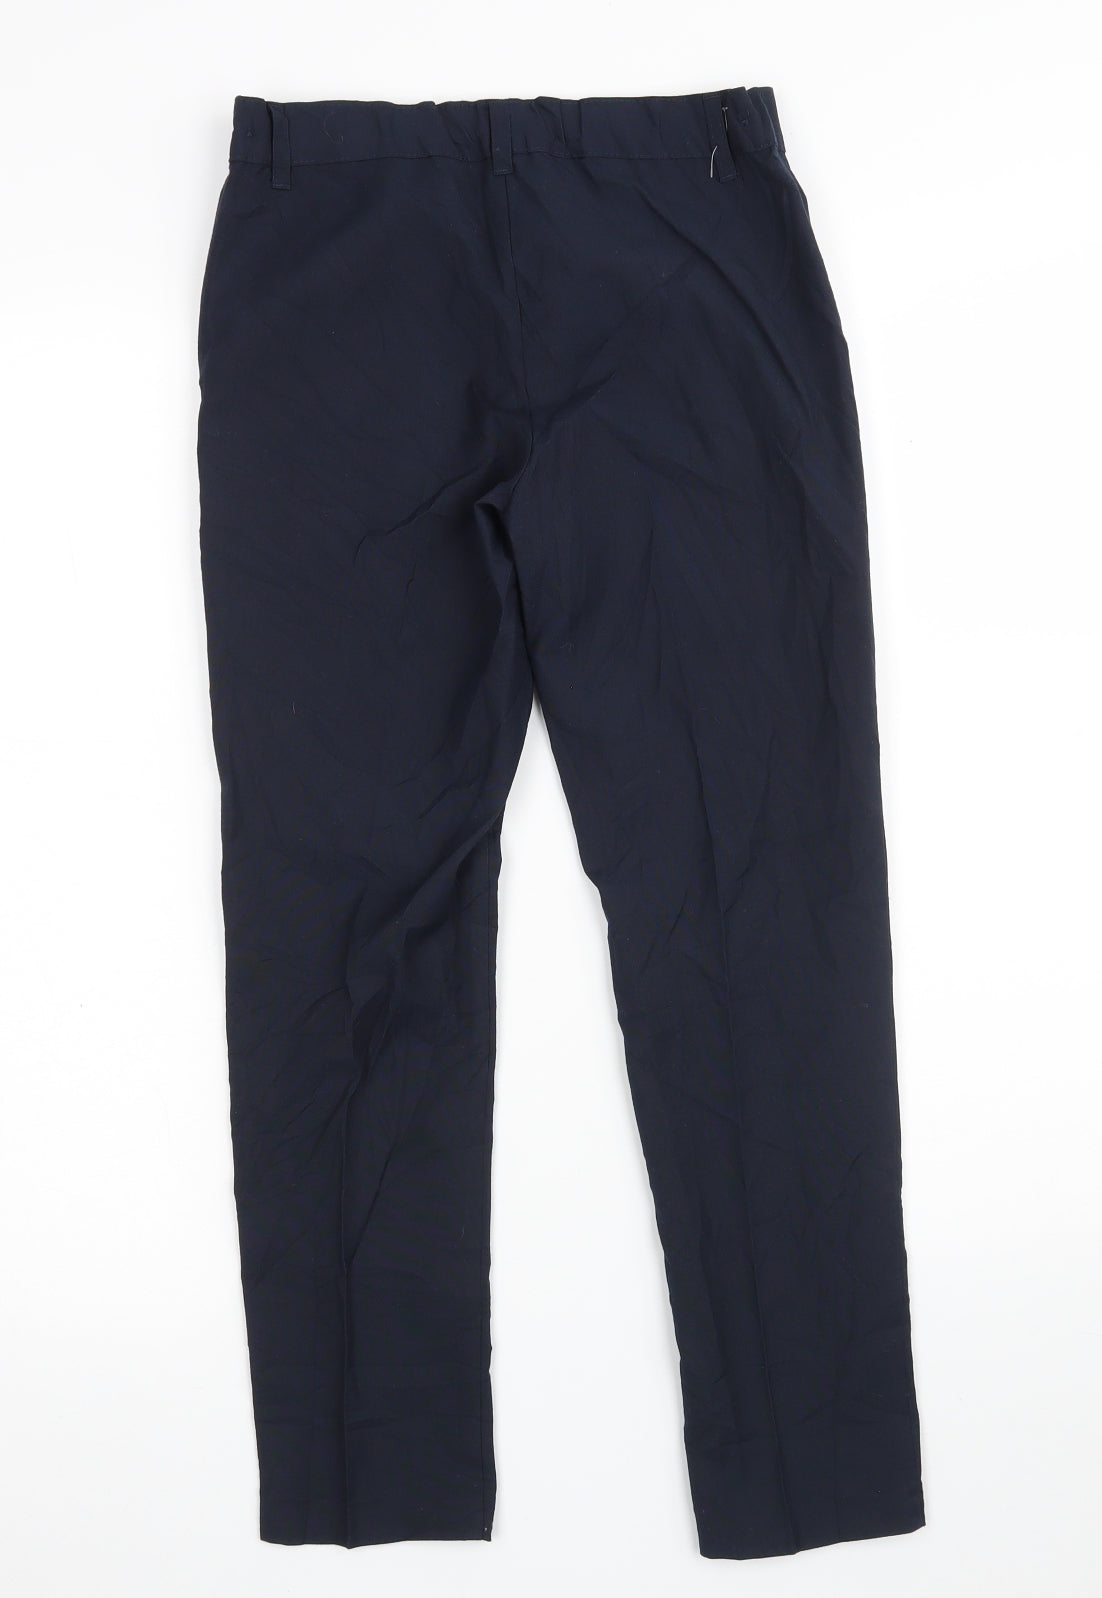 Marks and Spencer Girls Blue  Polyester Dress Pants Trousers Size 9-10 Years  Regular Zip